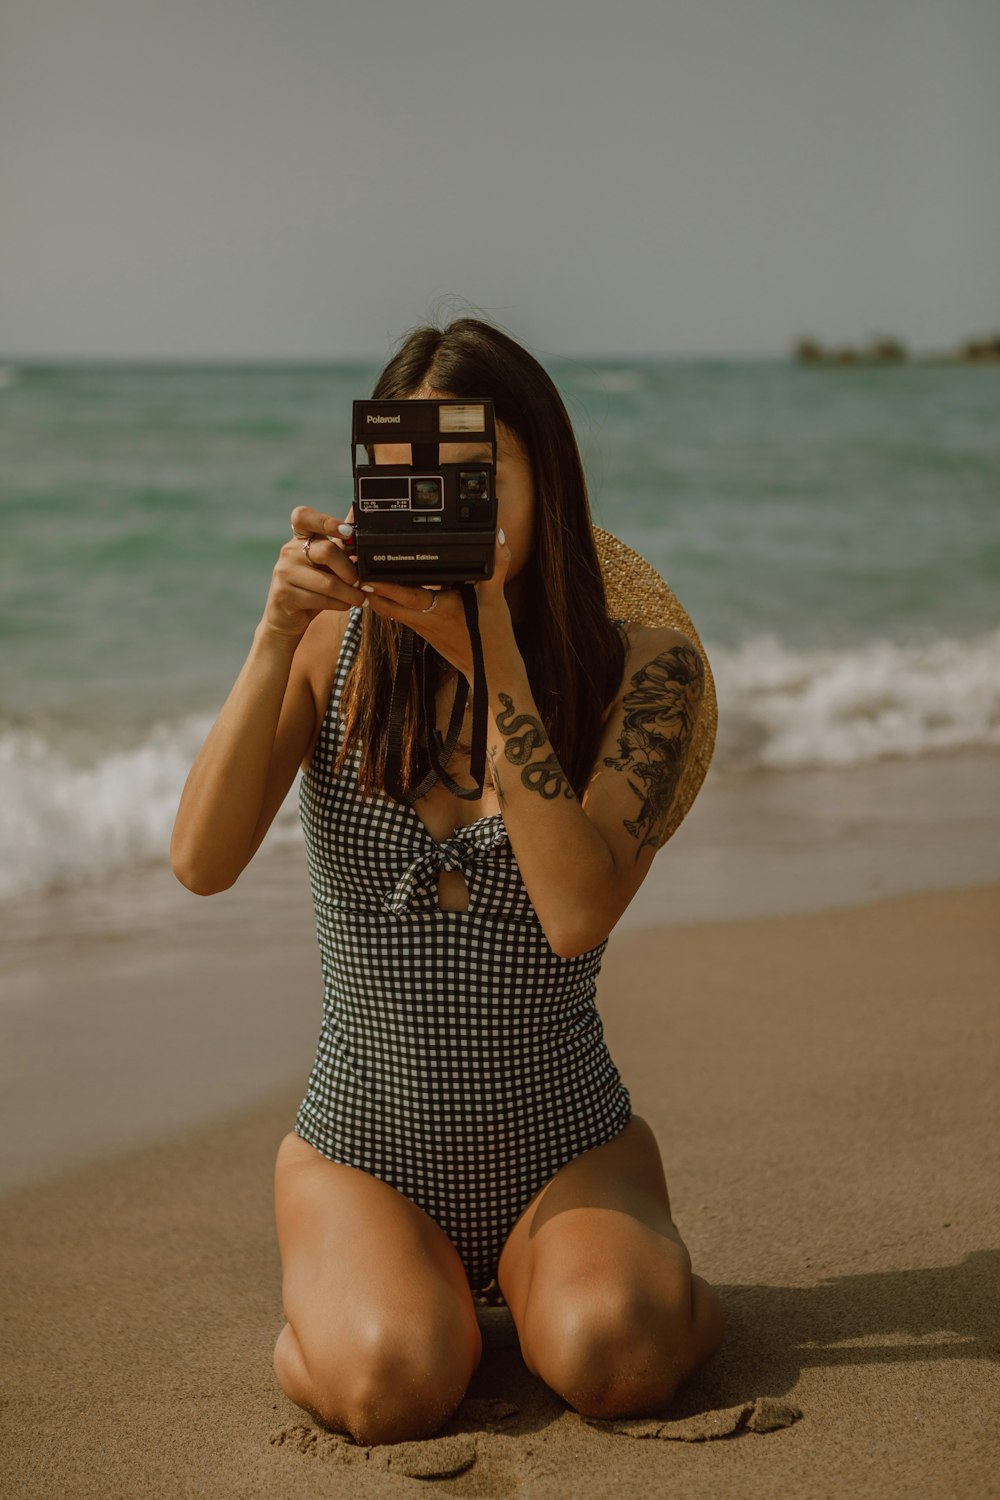 woman in black and white polka dot swimsuit holding black camera on beach during daytime